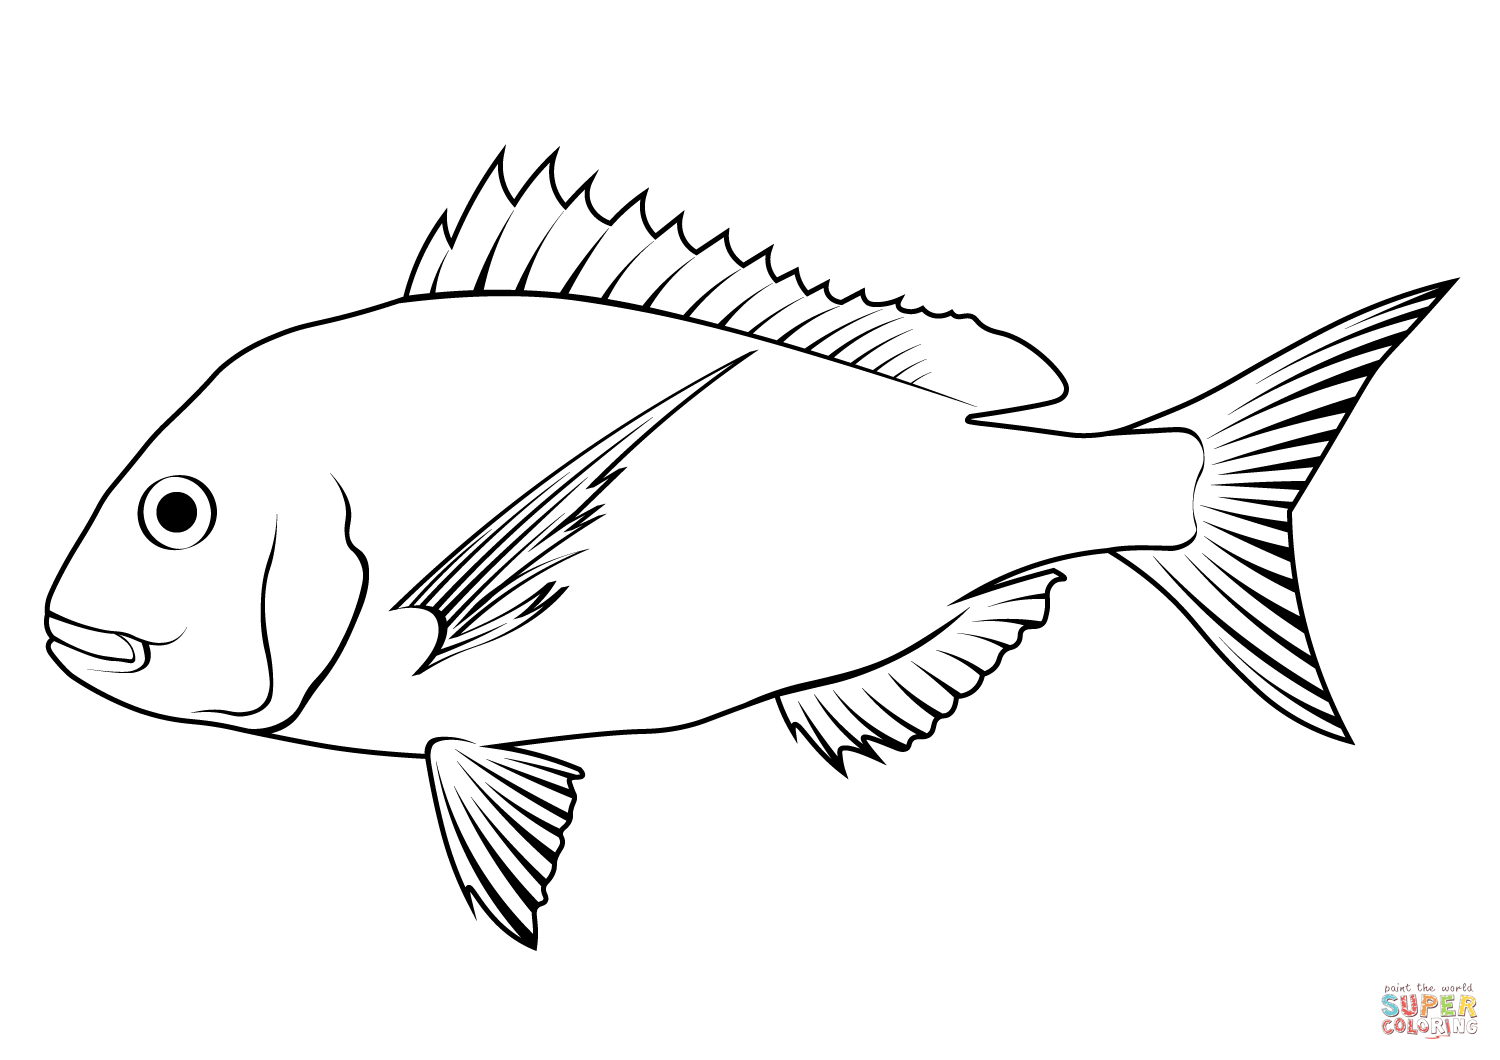 Australasian snapper chrysophrys auratus coloring page free printable coloring pages